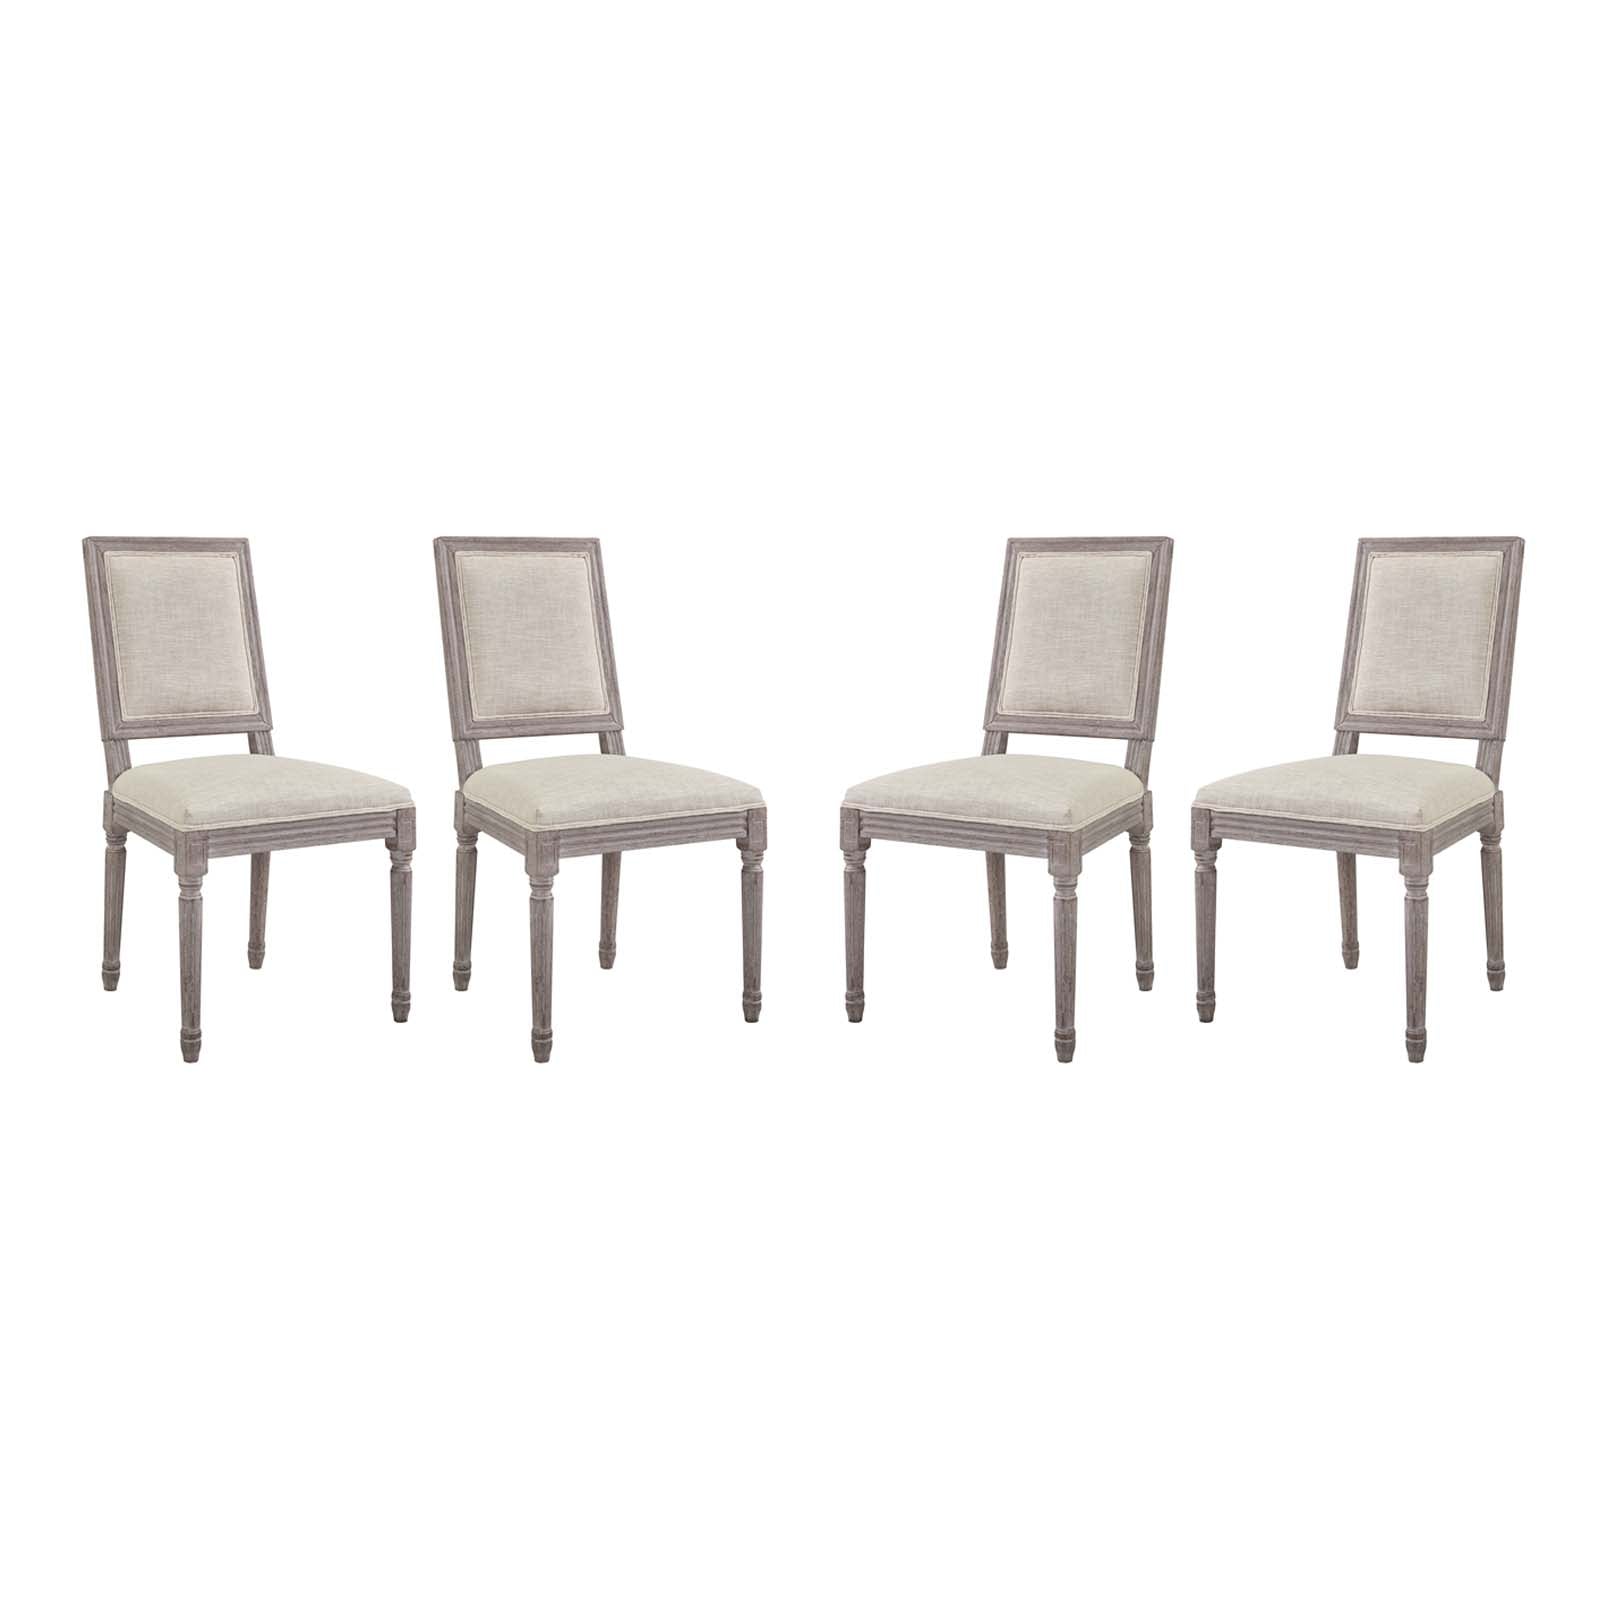 Court Dining Side Chair Upholstered Fabric Set of 4 - East Shore Modern Home Furnishings